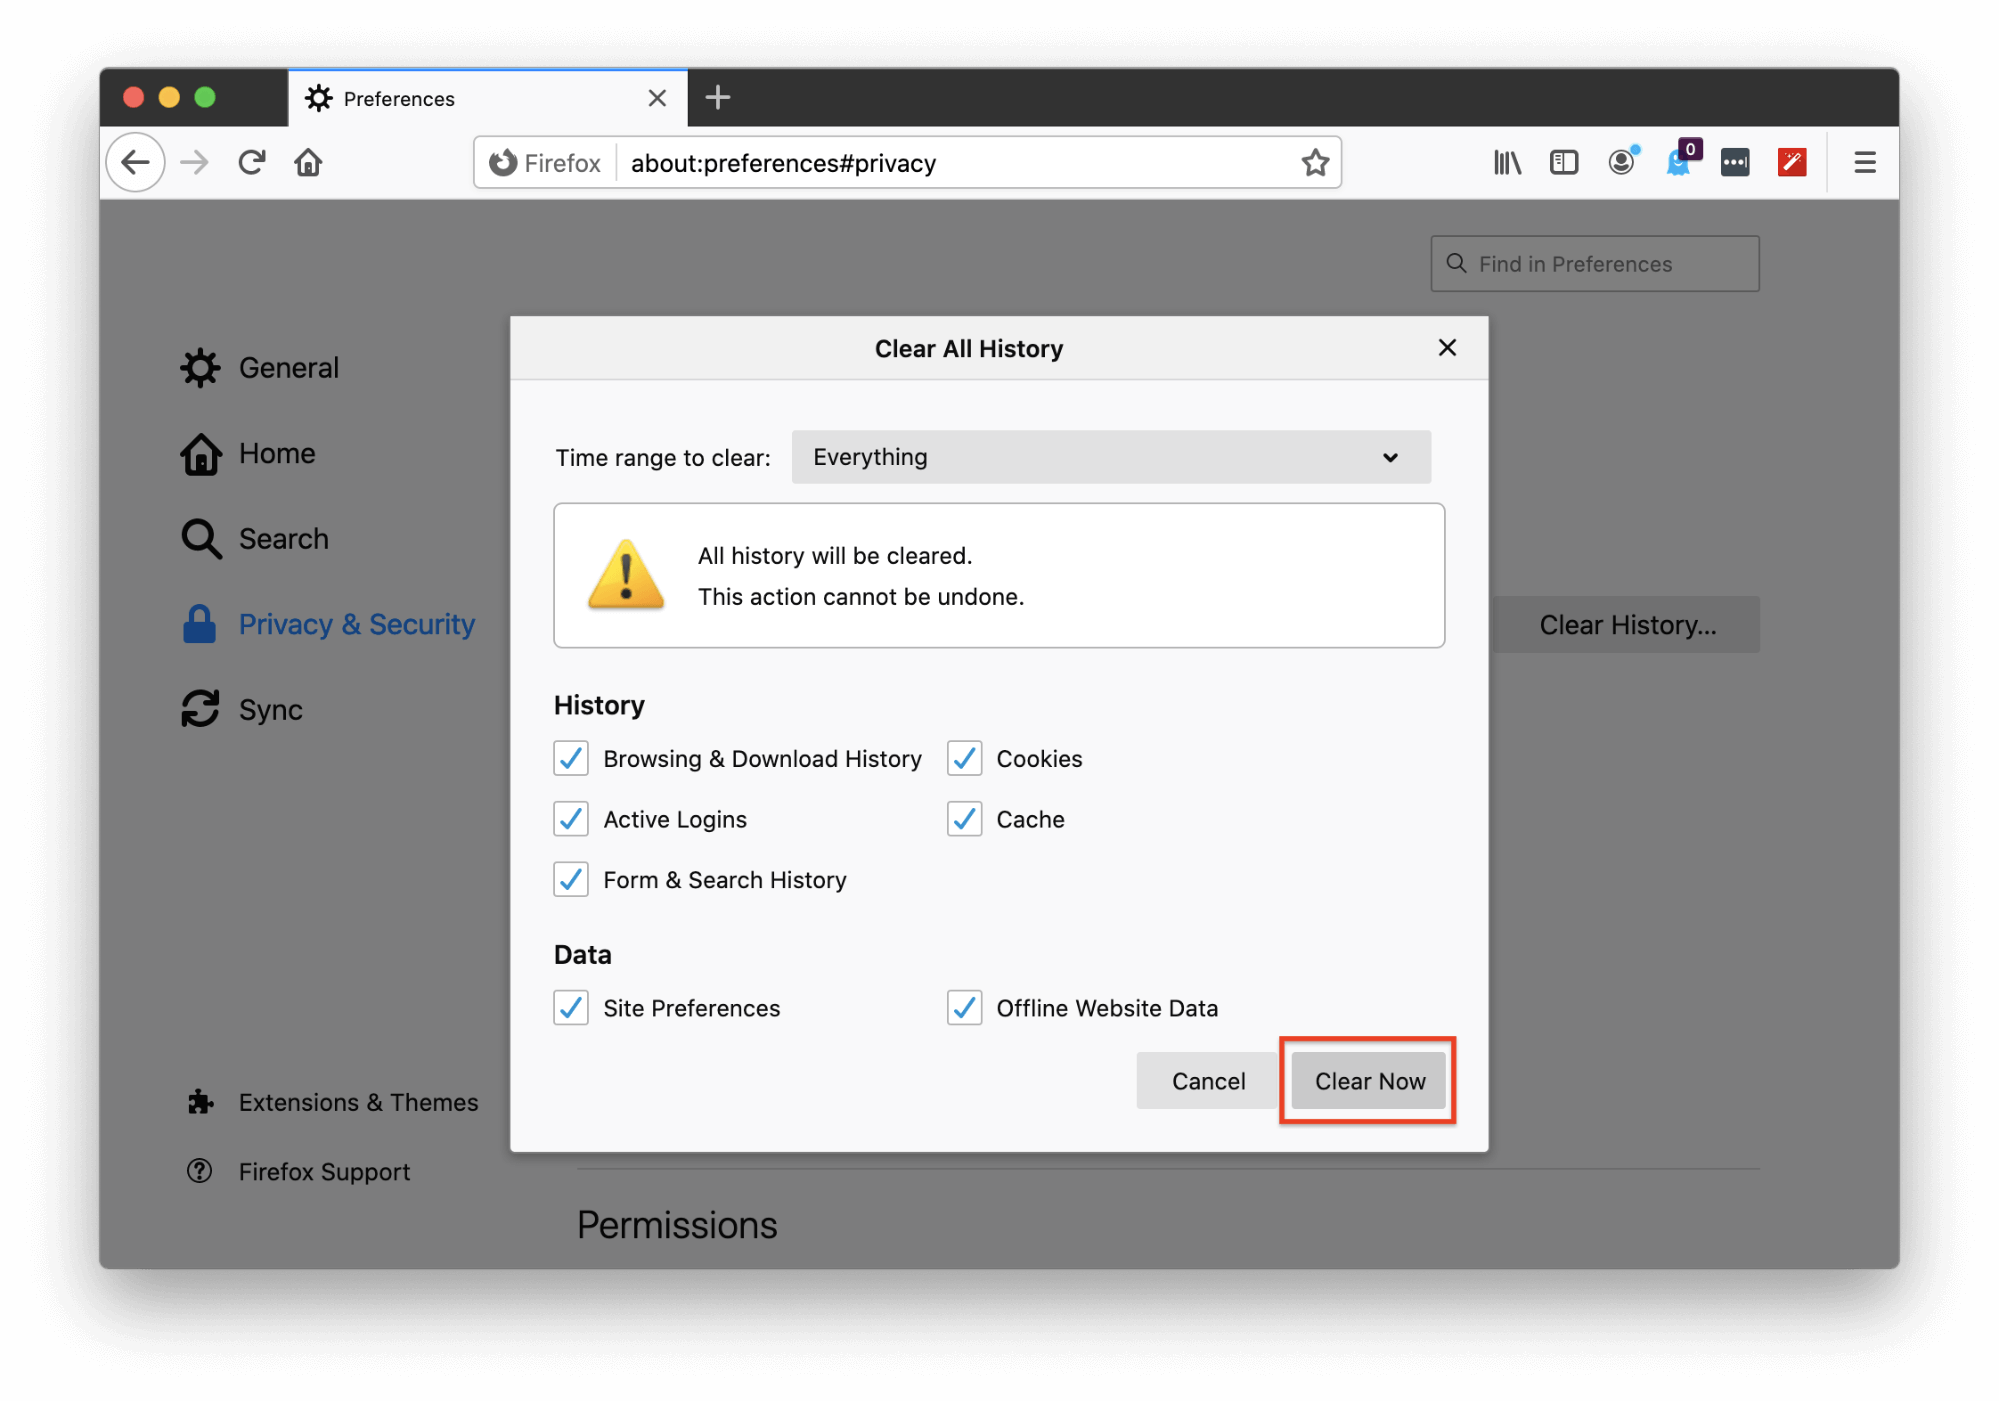 Firefox preferences - clear all history